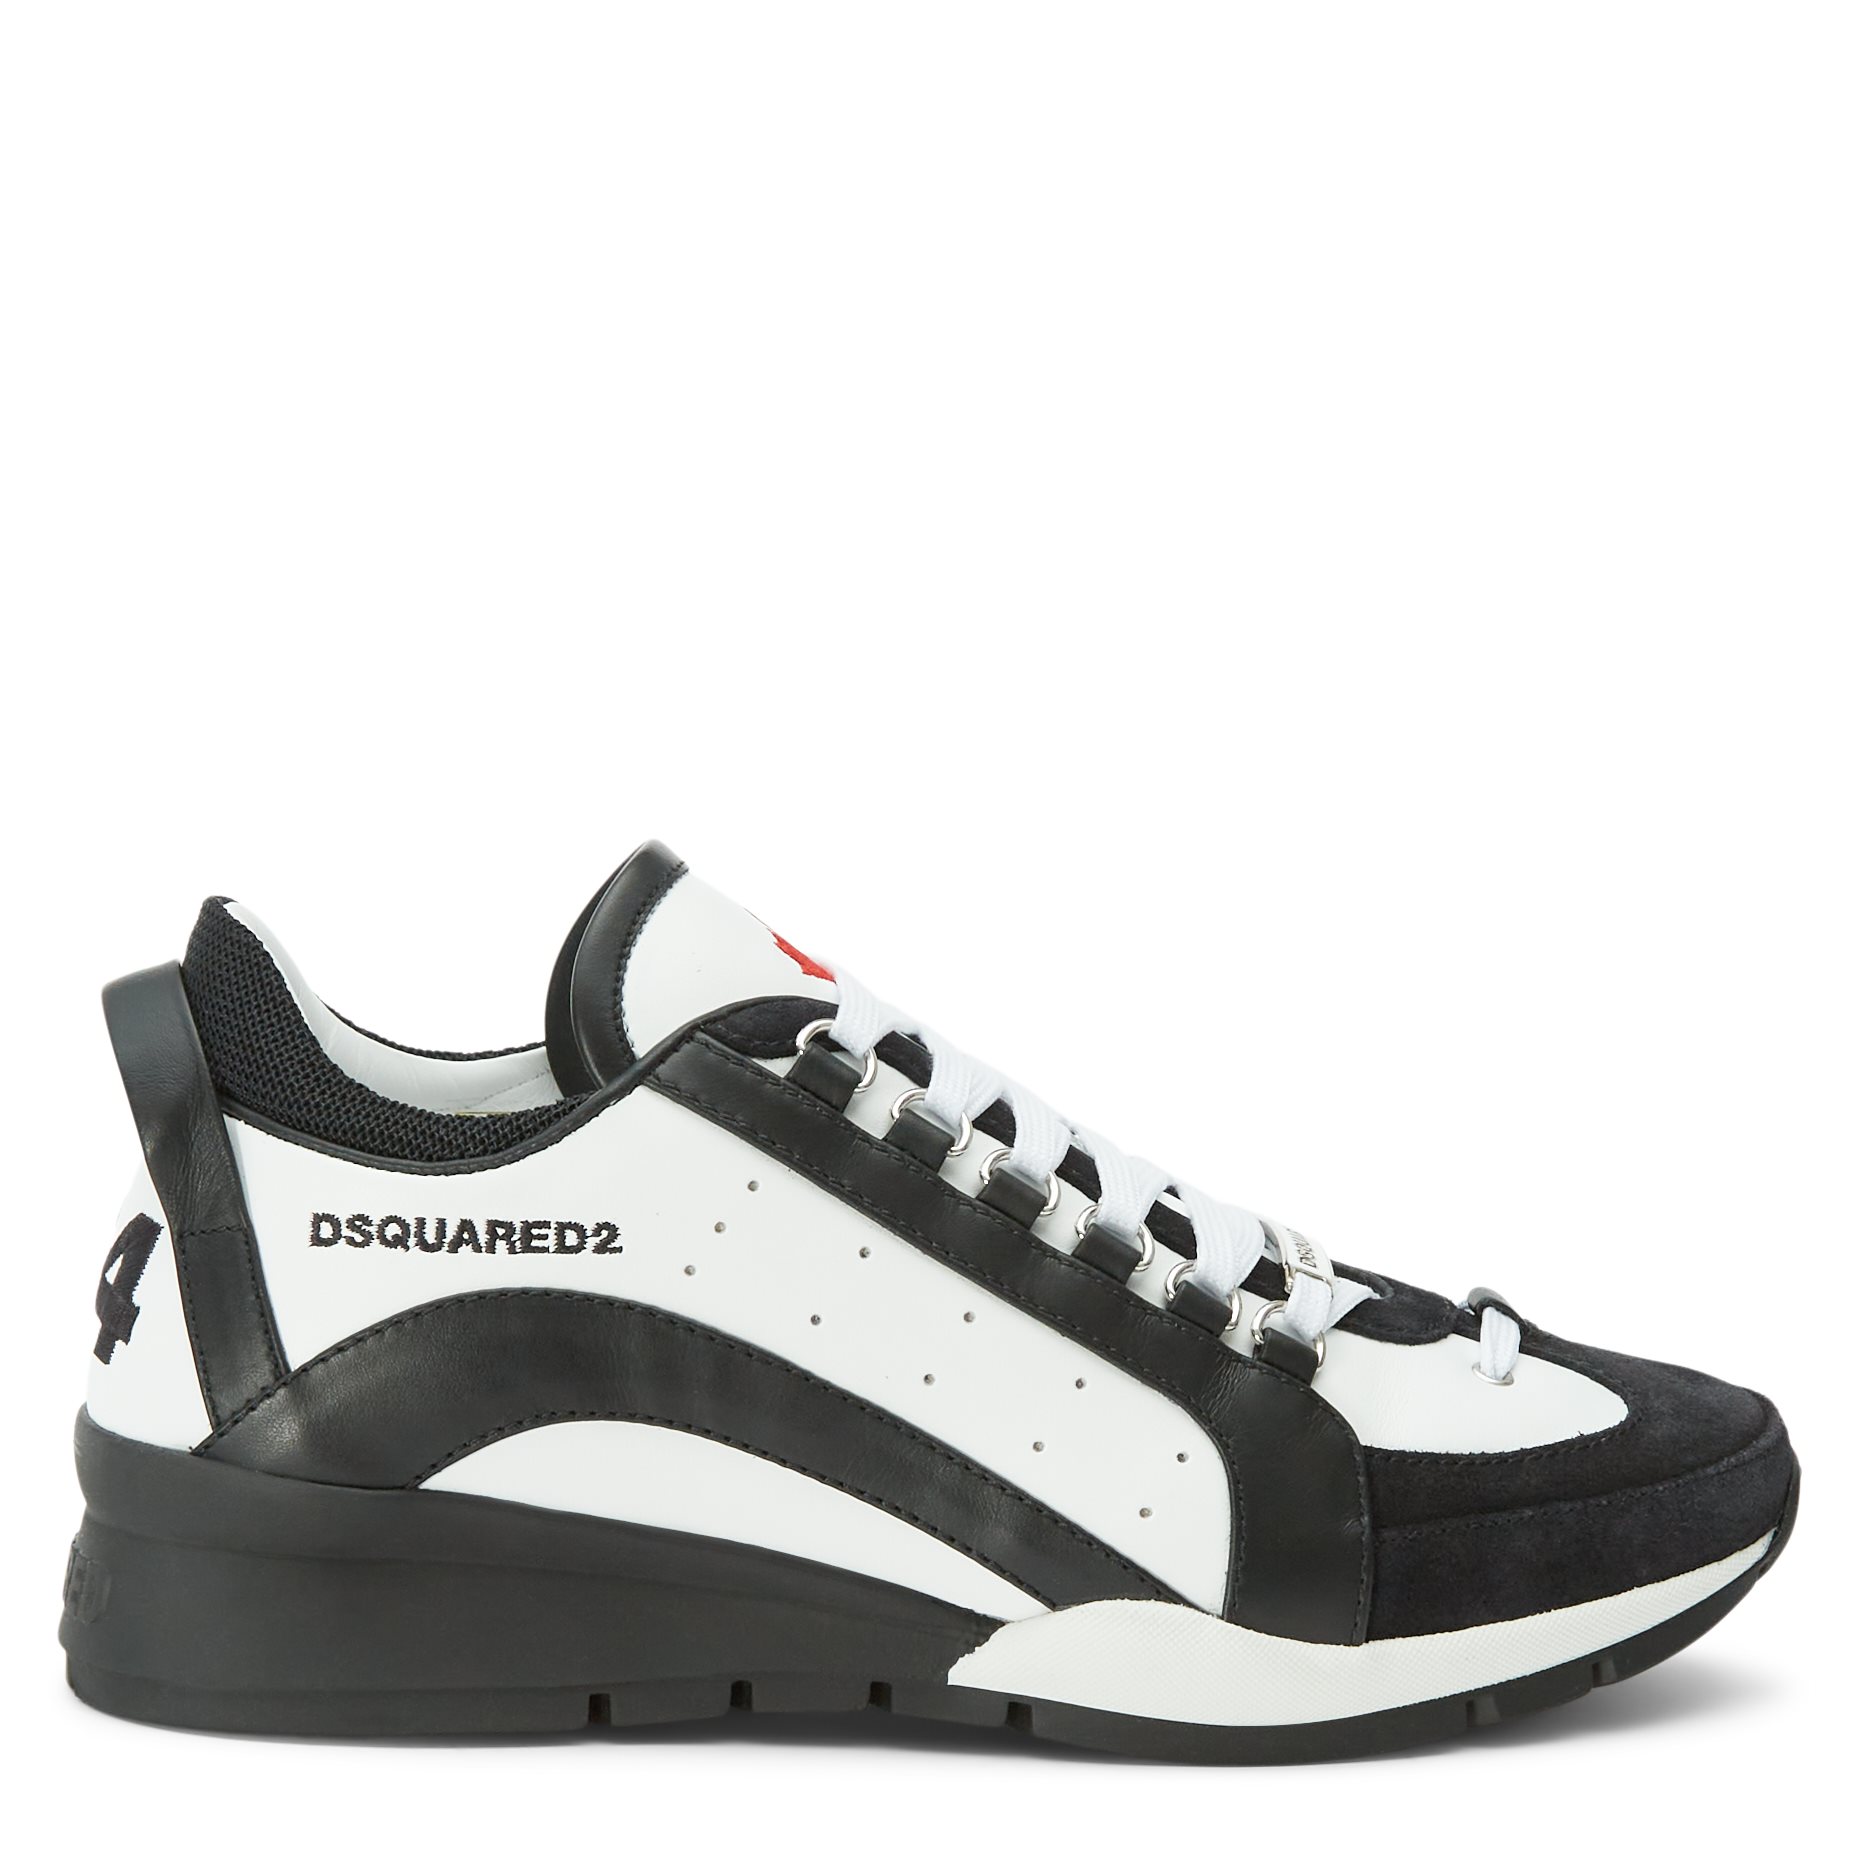 Dsquared2 Shoes SNM0299 13220001 White